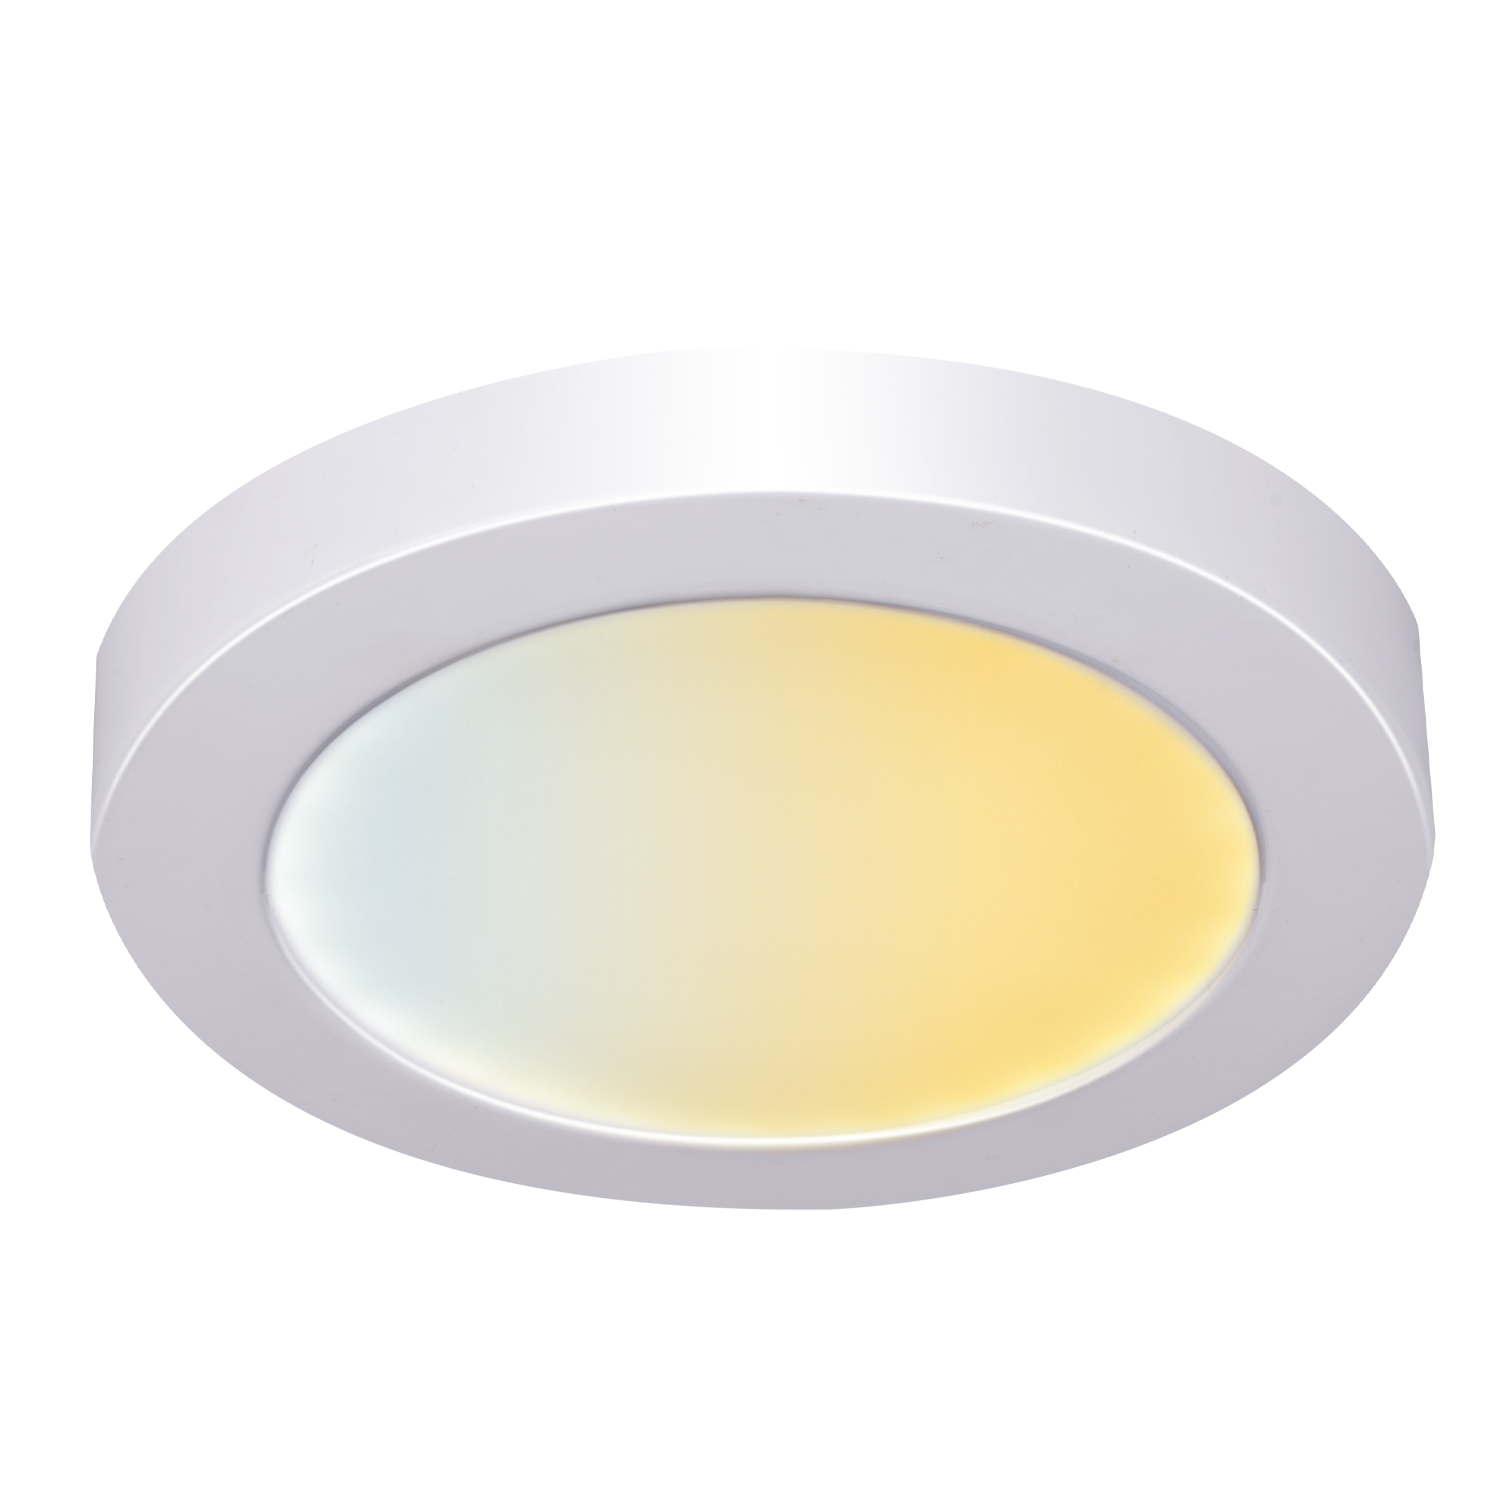 Smart Ceiling lamp Warm/ Cool white 12W